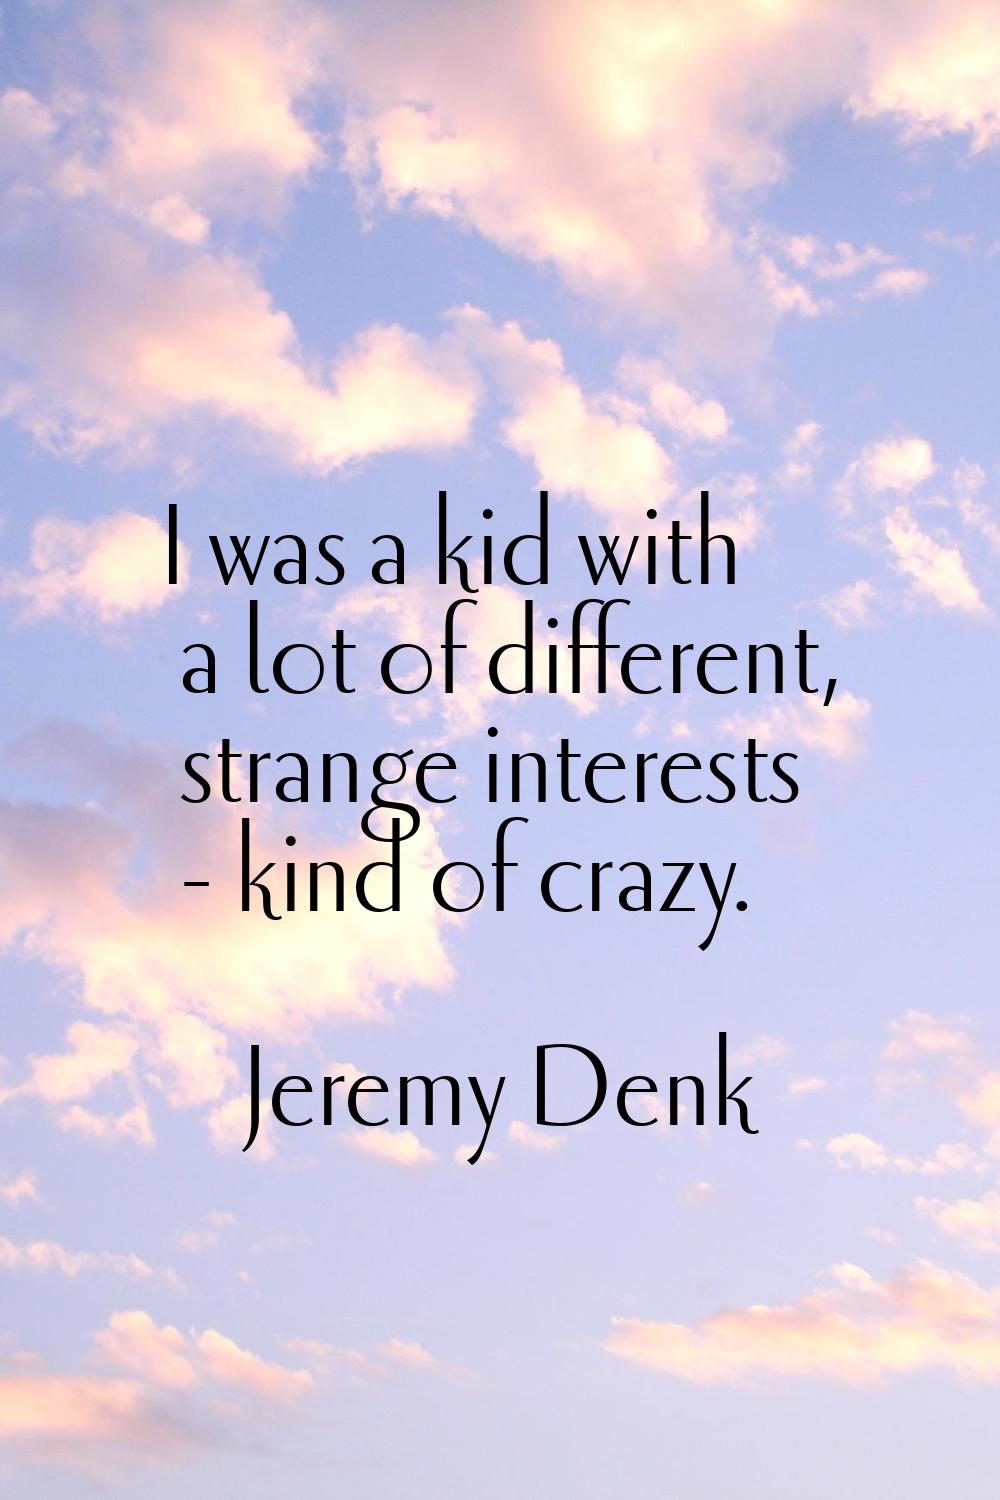 I was a kid with a lot of different, strange interests - kind of crazy.